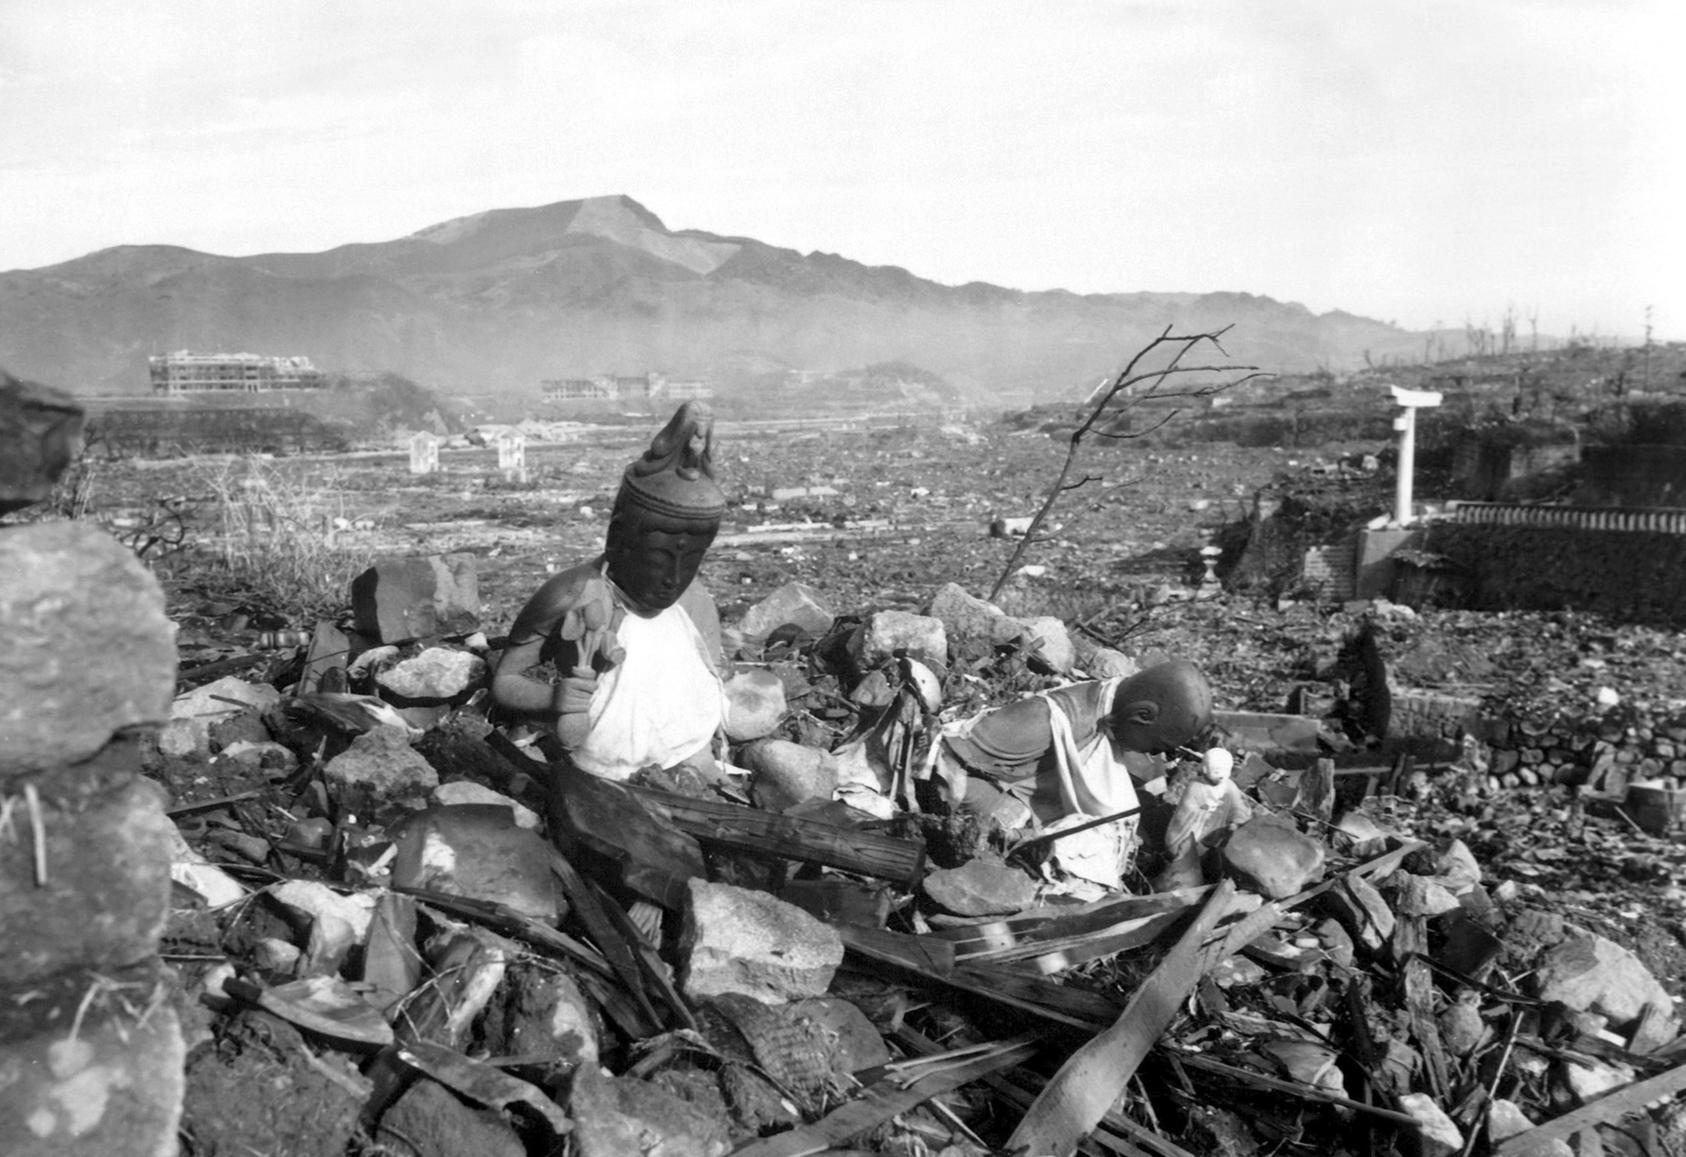 The city of Nagasaki was an irradiated debris field—here with the remains of a temple in the foreground—when Navy Ensign Mike Mapes arrived to help keep the peace following its destruction with the atom bomb. (Corporal Lynn P. Walker, Jr./USMC)